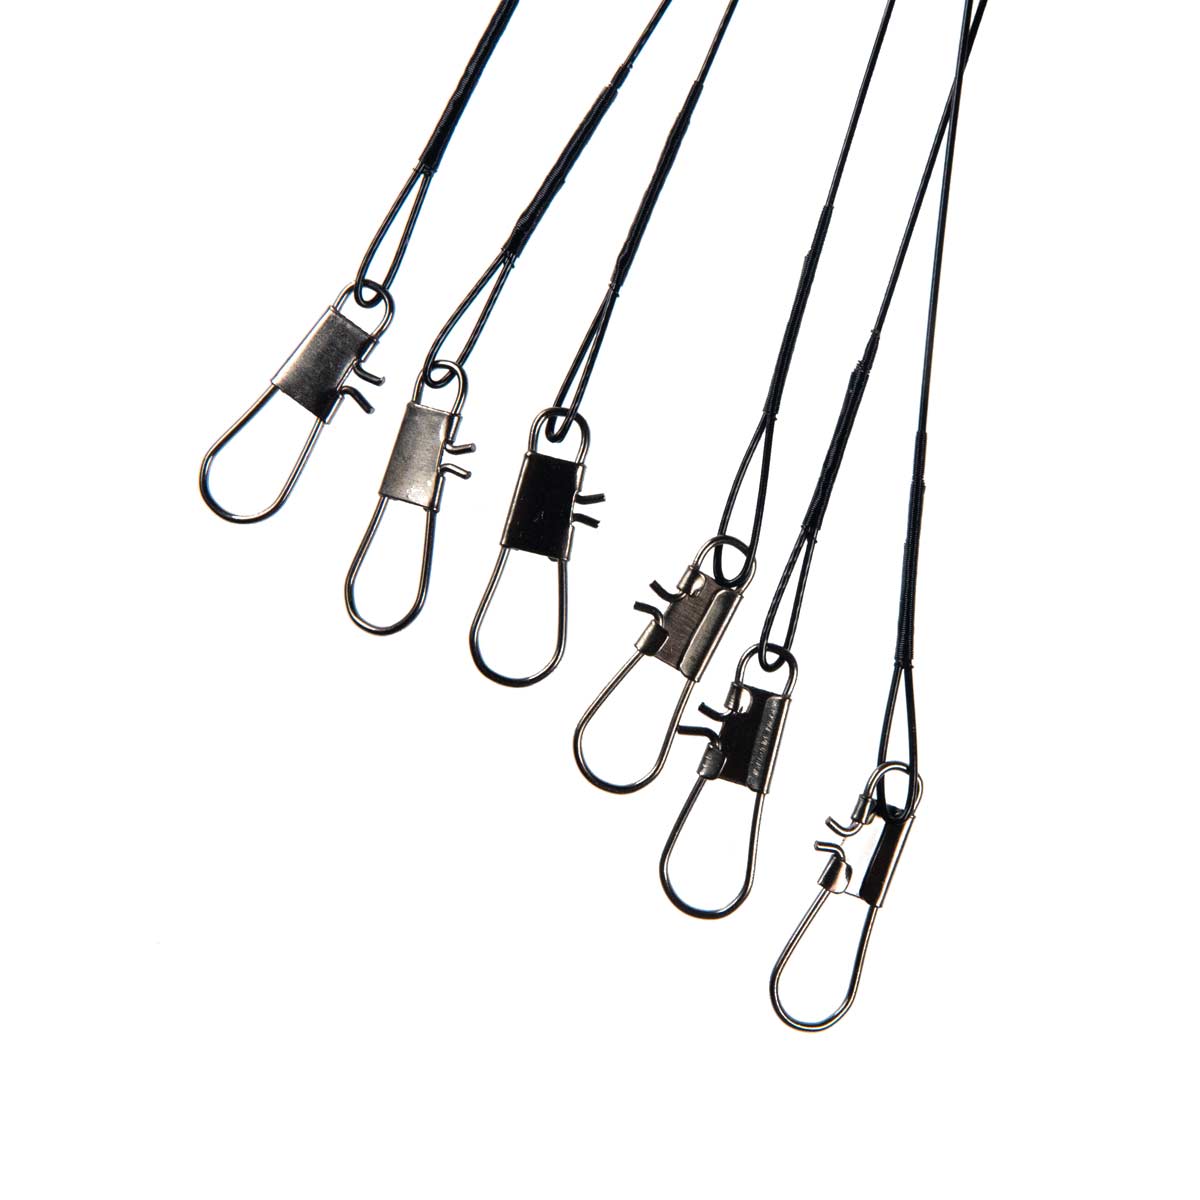 Nylon Coated Wire Leader Rigs – Rite Angler